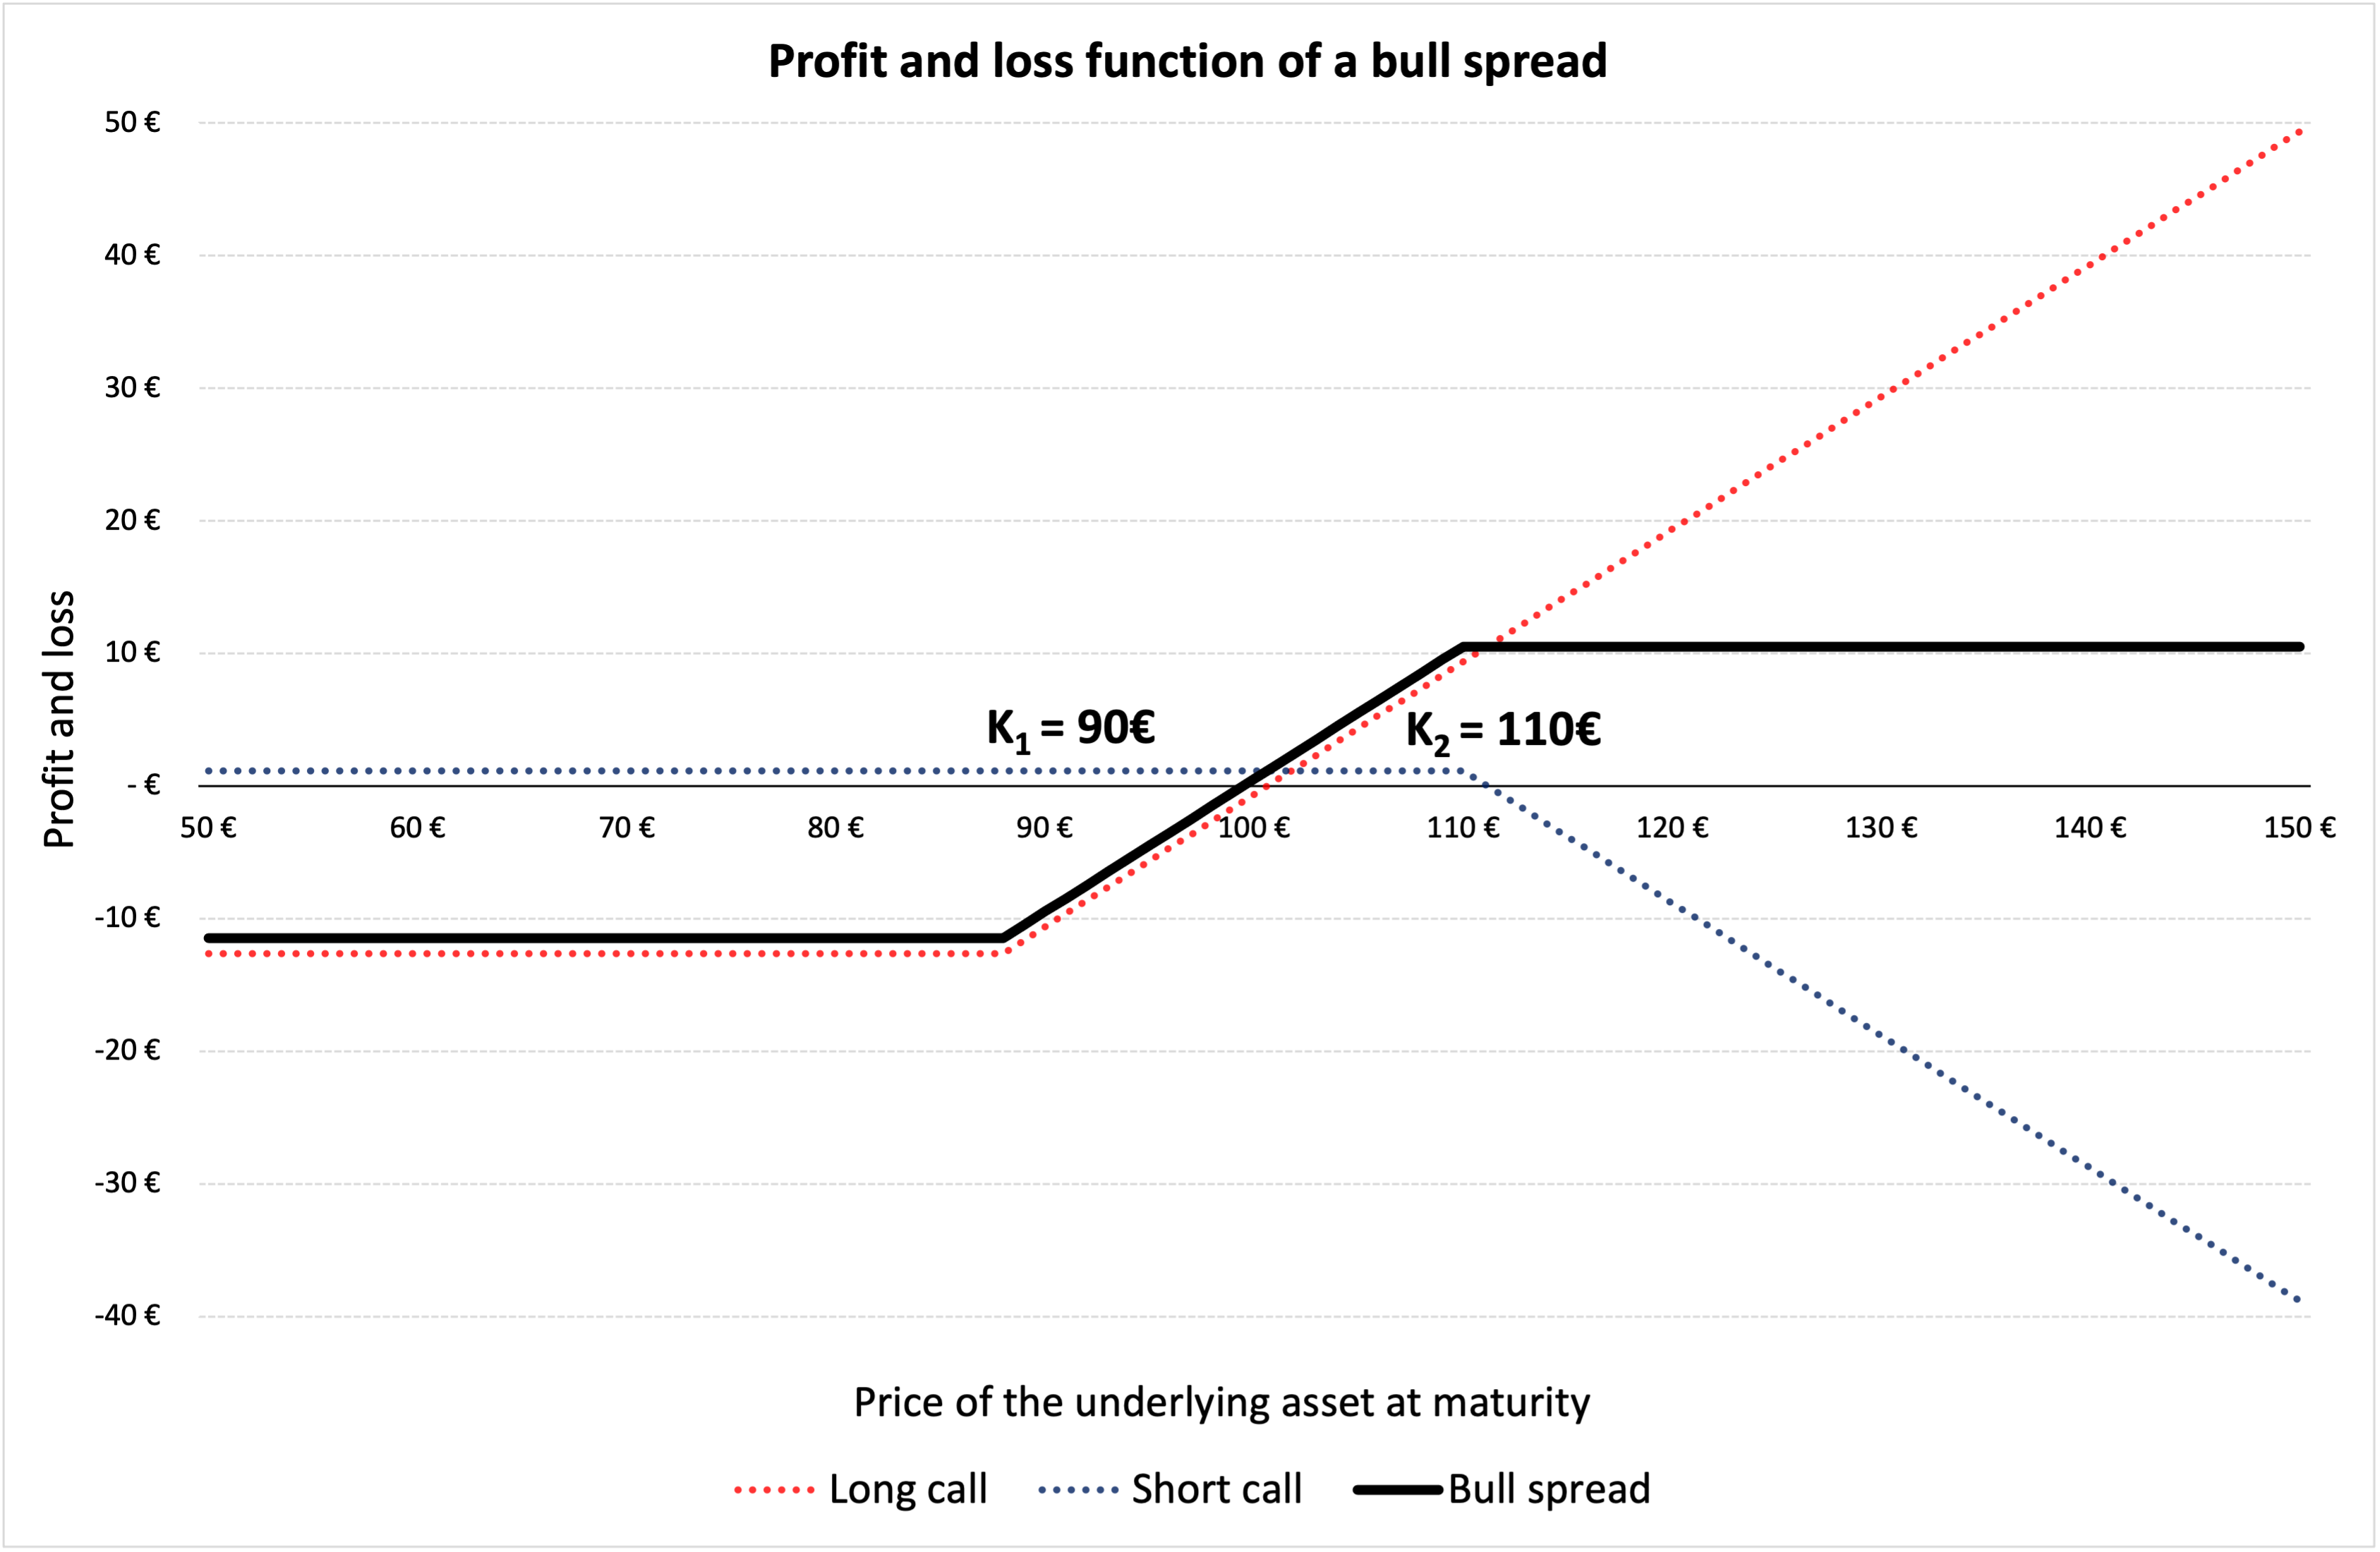  Profit and loss (P&L) function of a bul spread 